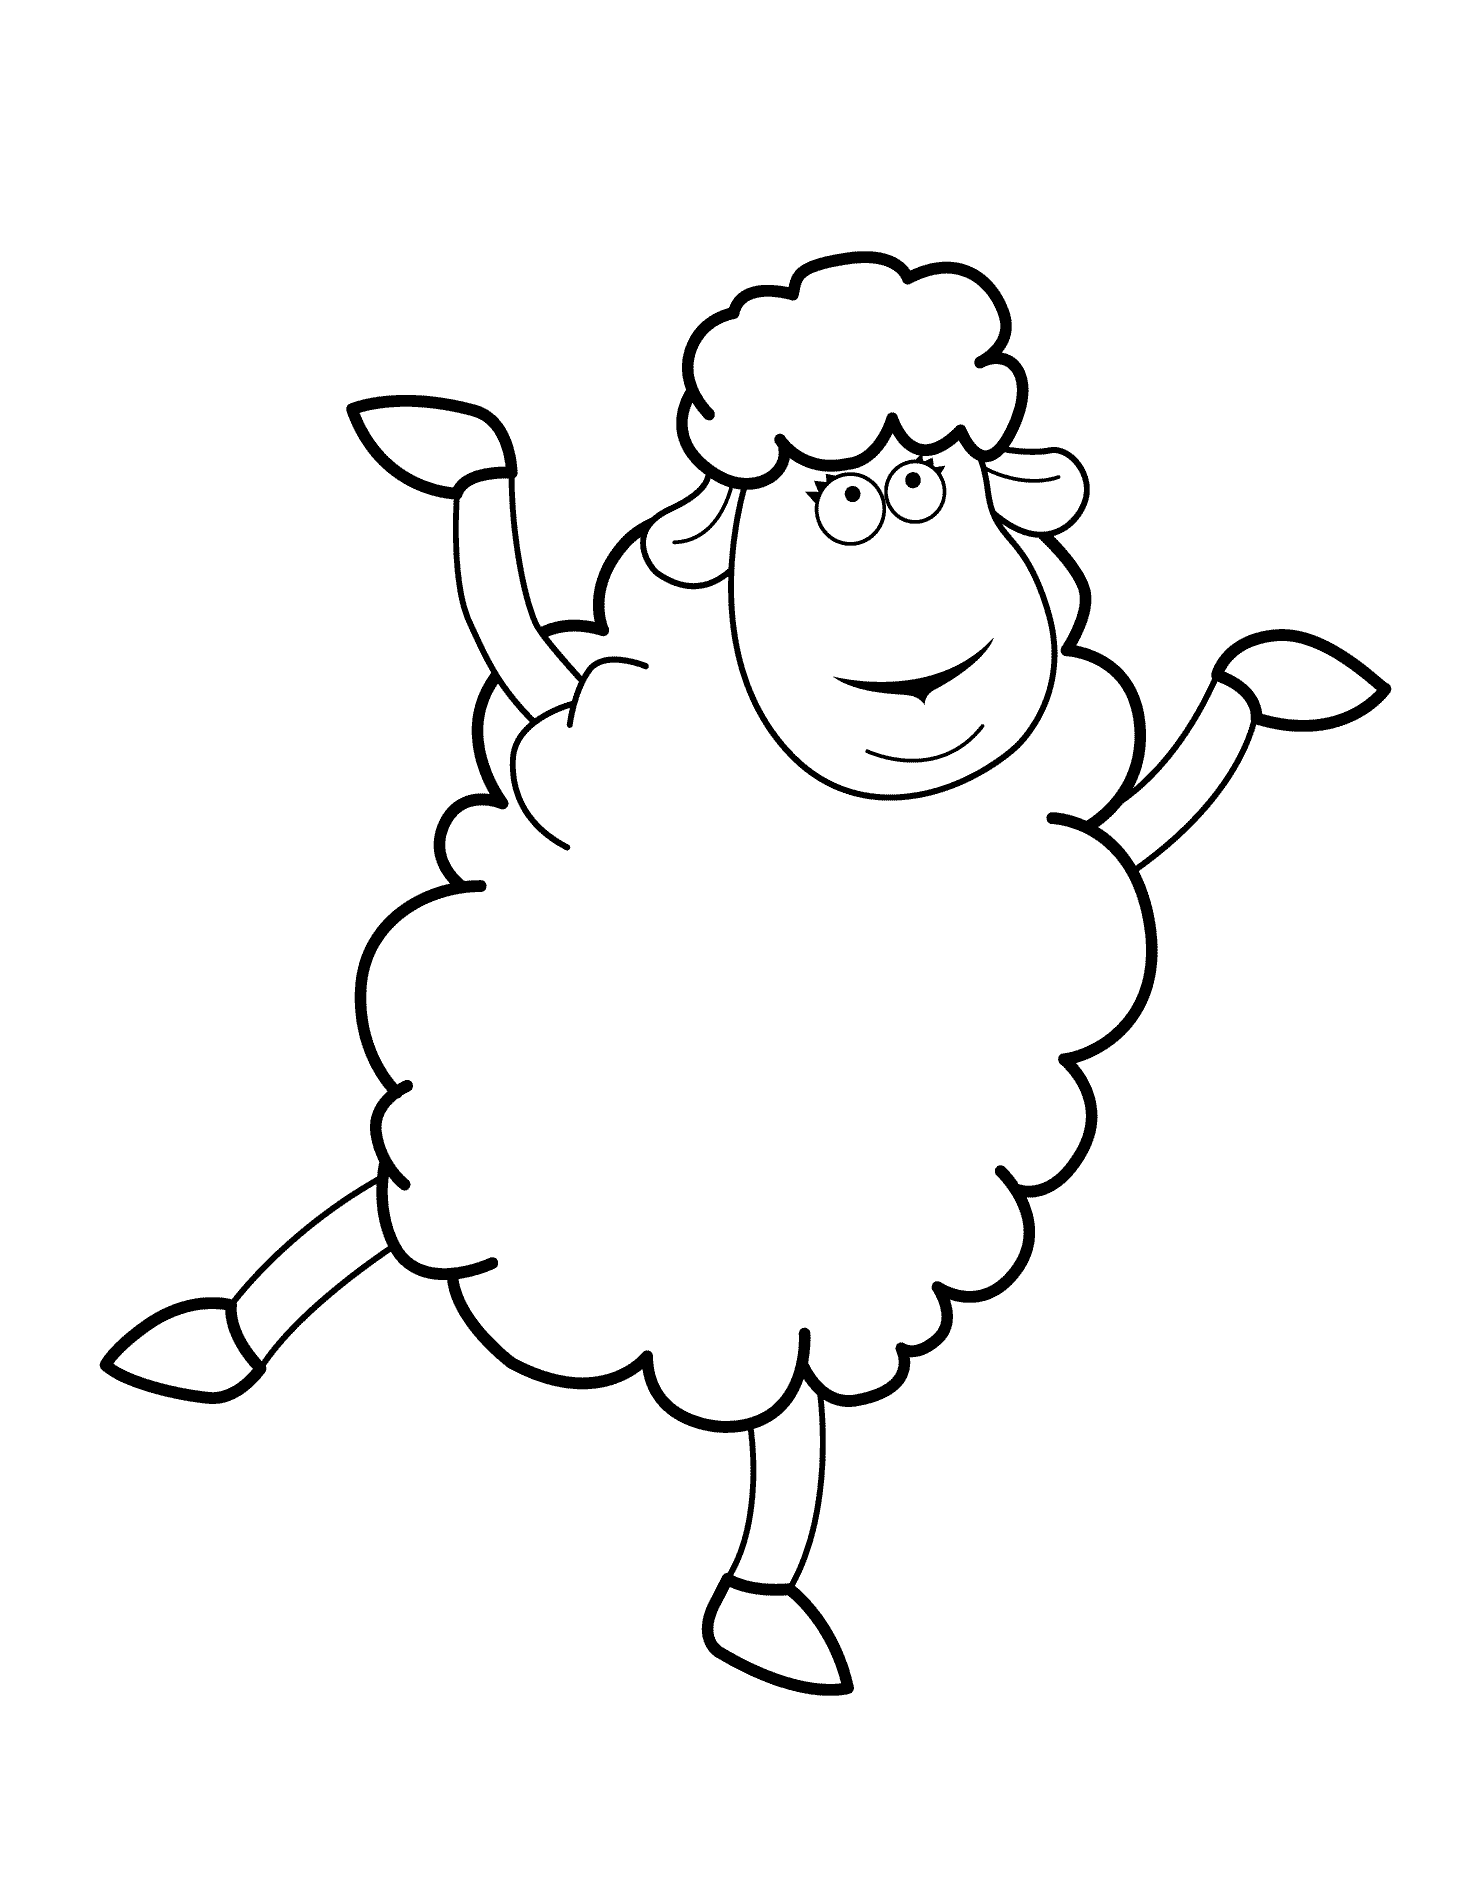 Funny Animal 26 For Kids Coloring Page